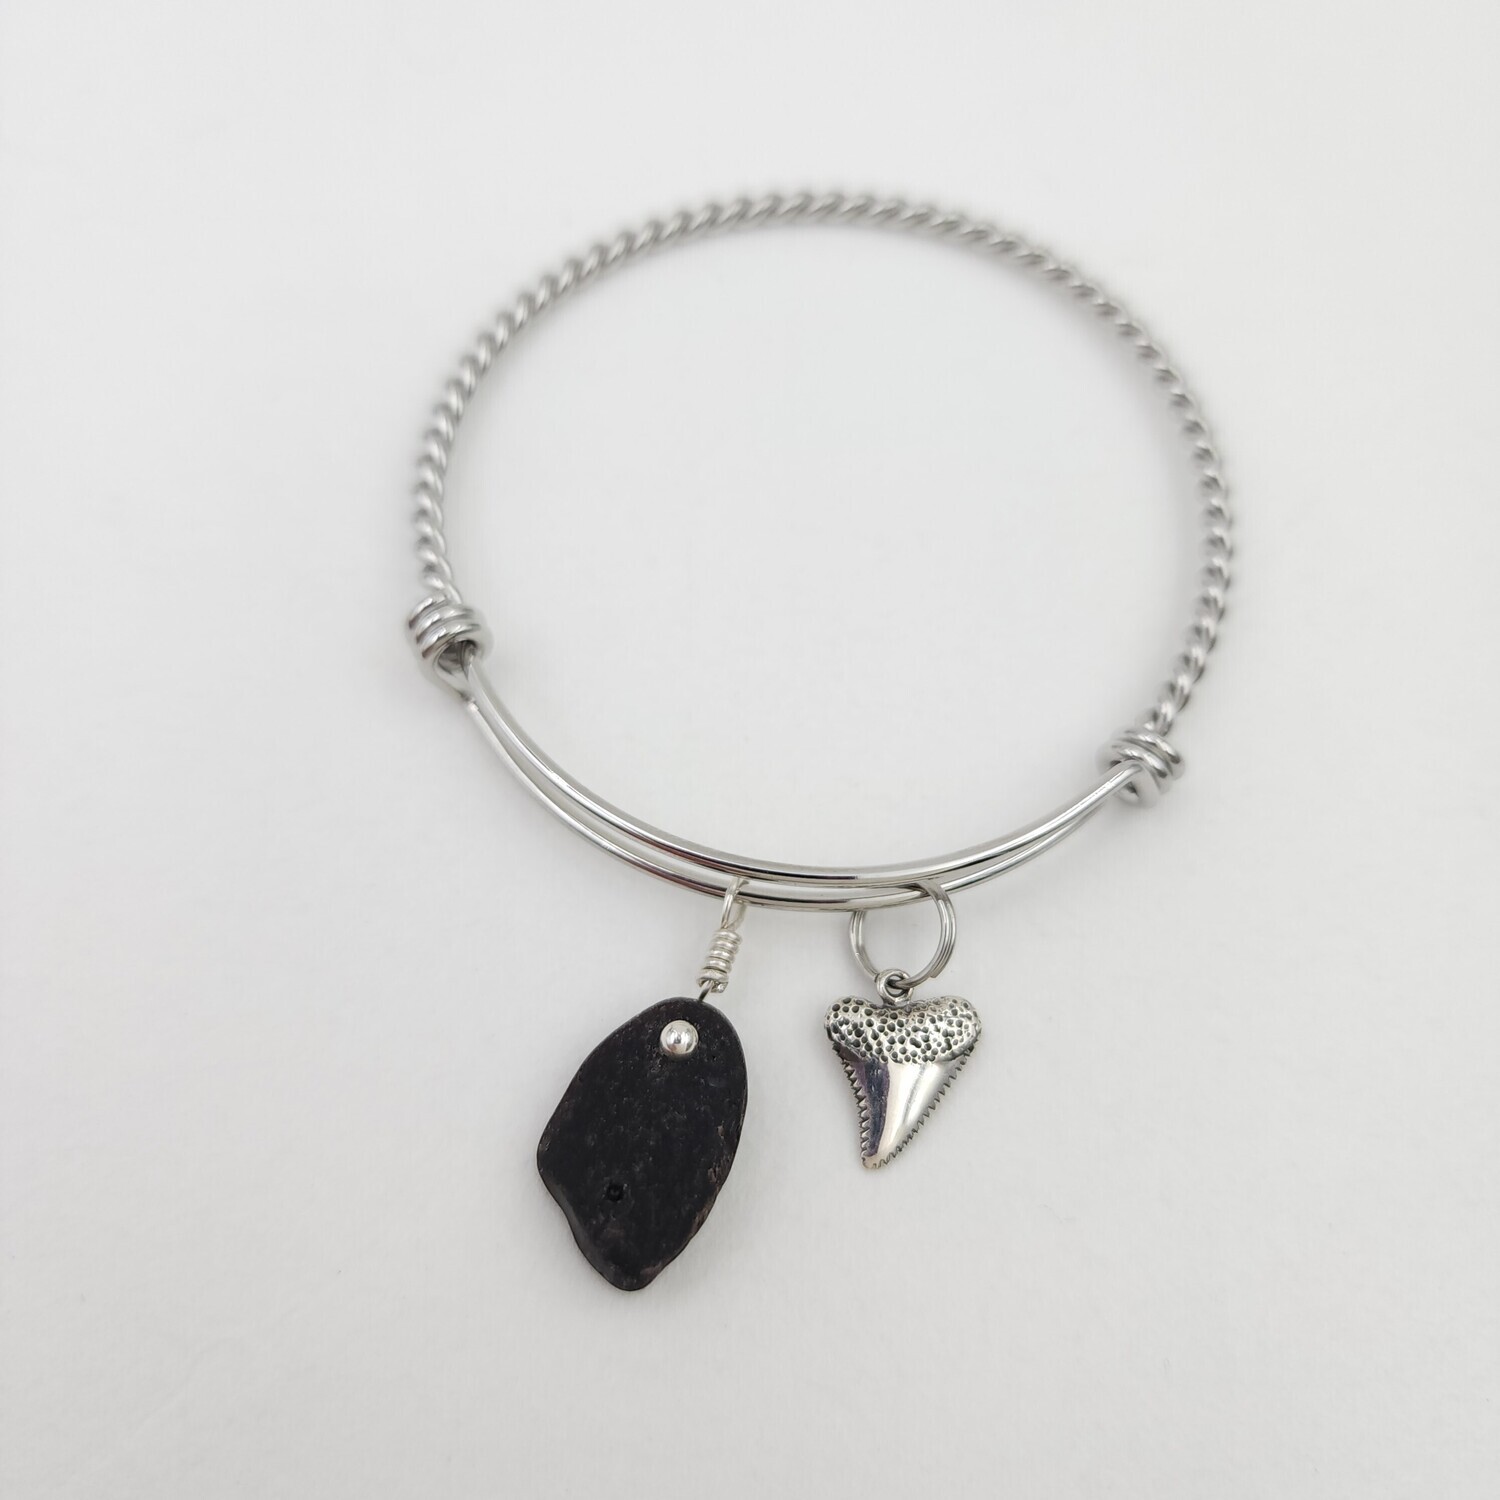 Twisted Bangle Bracelet with Shark's Tooth Charm and Vitrite Lake Erie Beach Glass